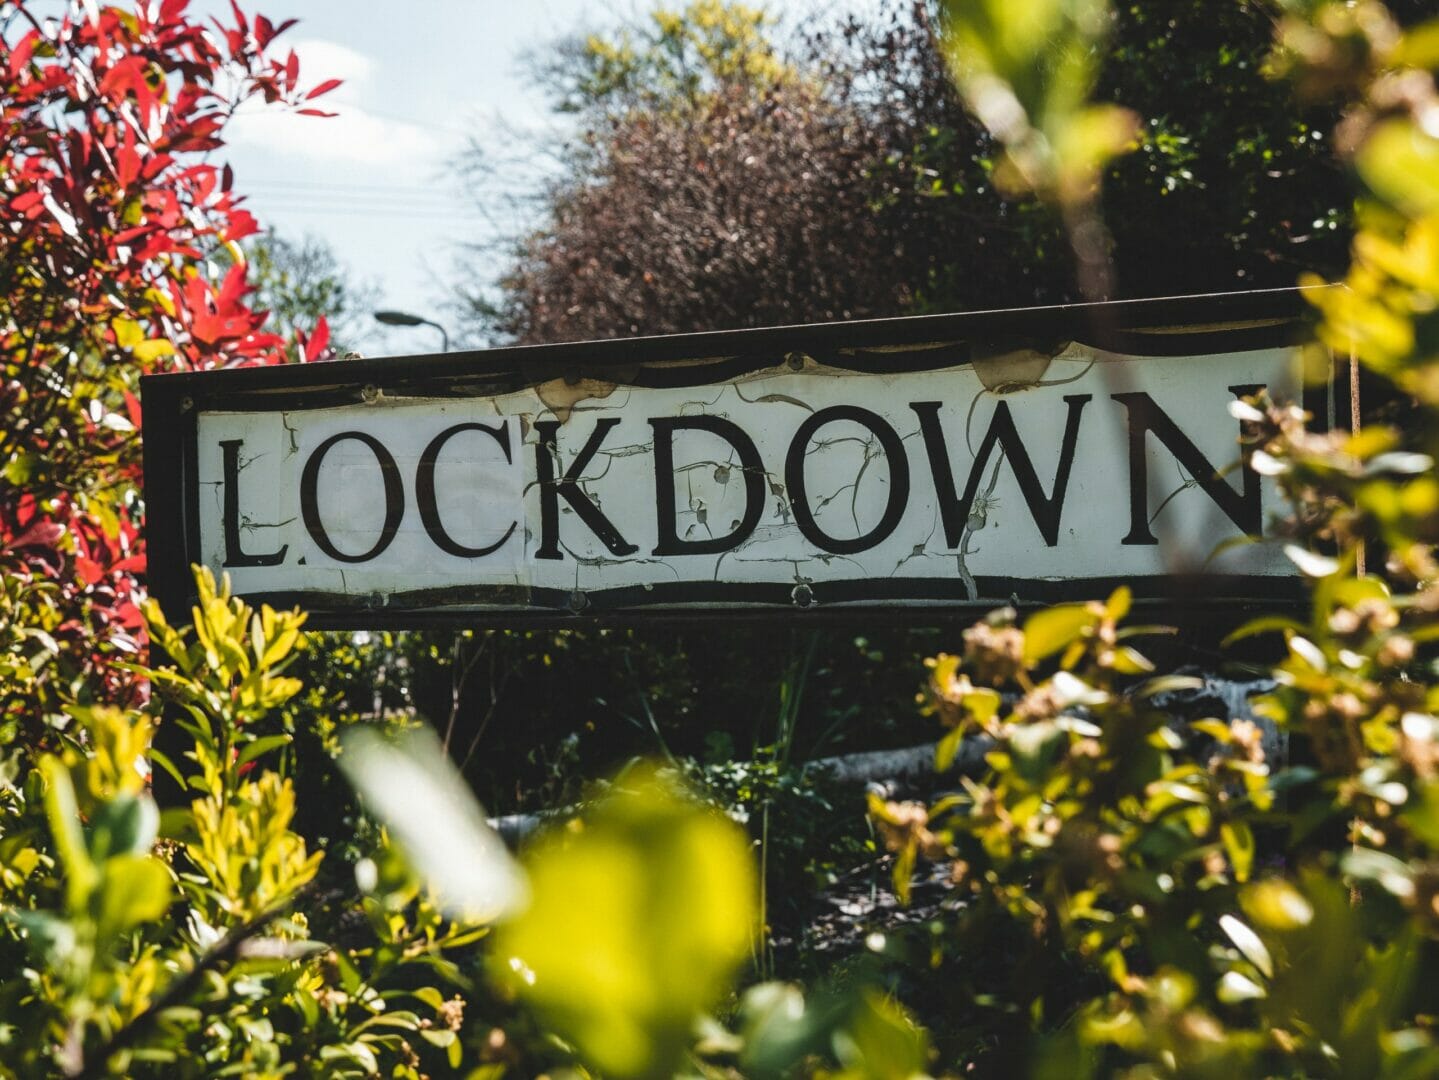 Has Lockdown Made the UK Fall Back in Love with Tradition?